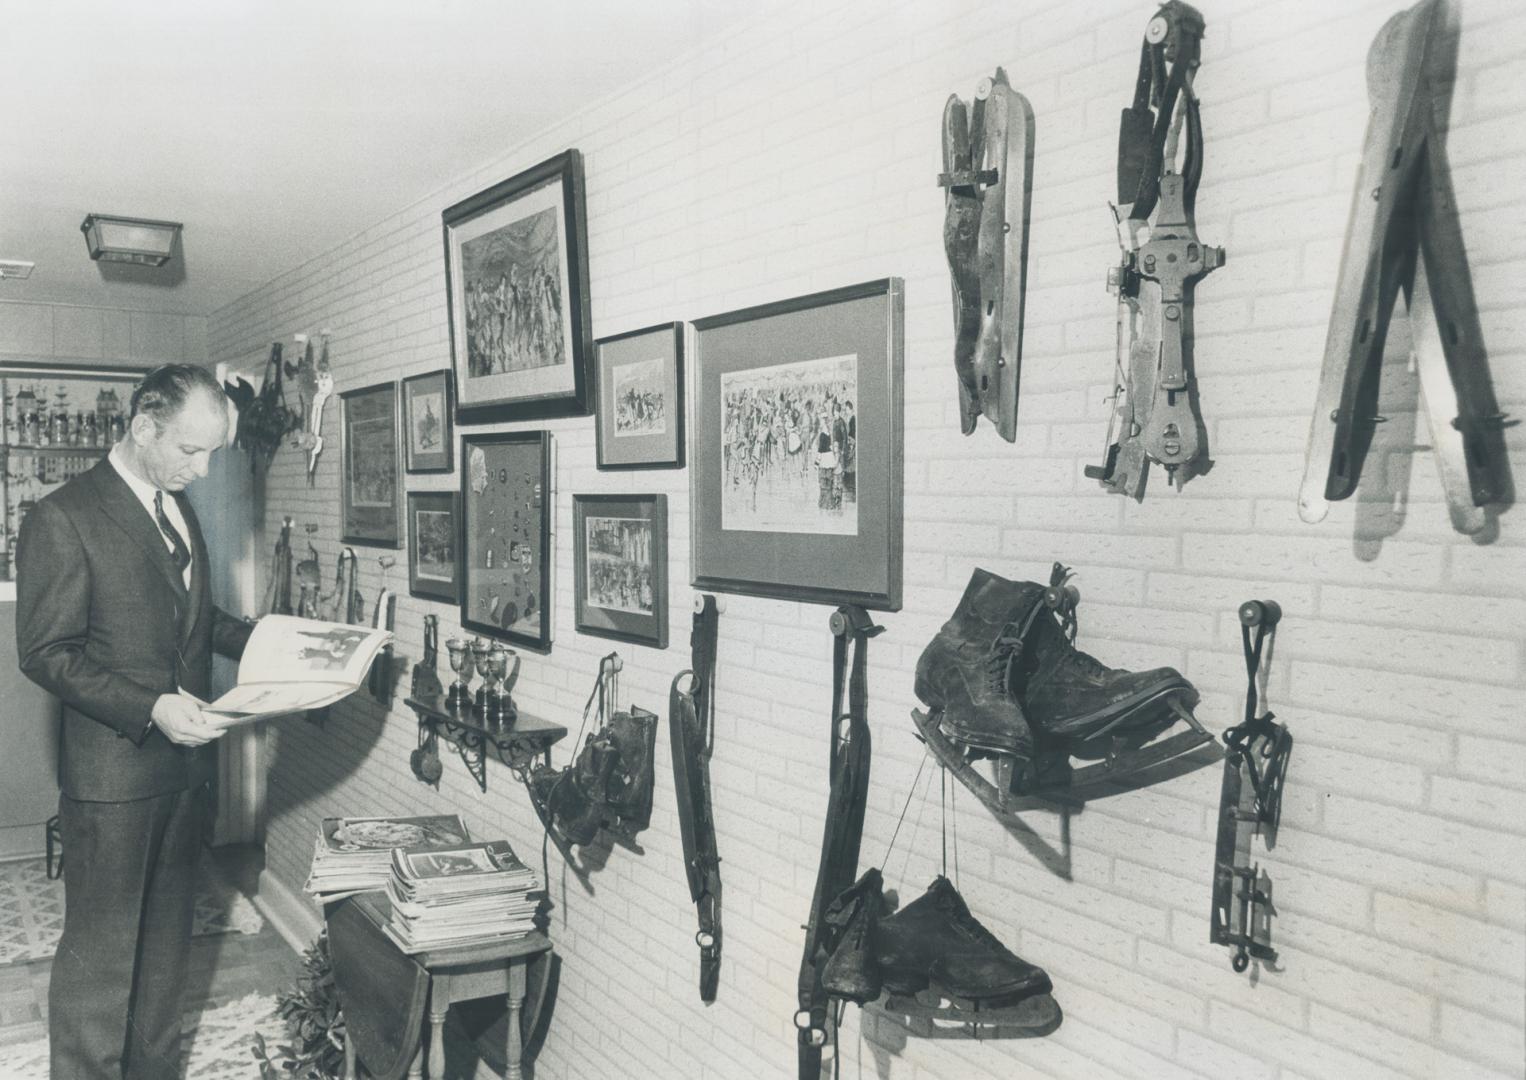 Figure-skating champion Nigel Stephens, who gained his laurels in the 1940s, has hung up his skates